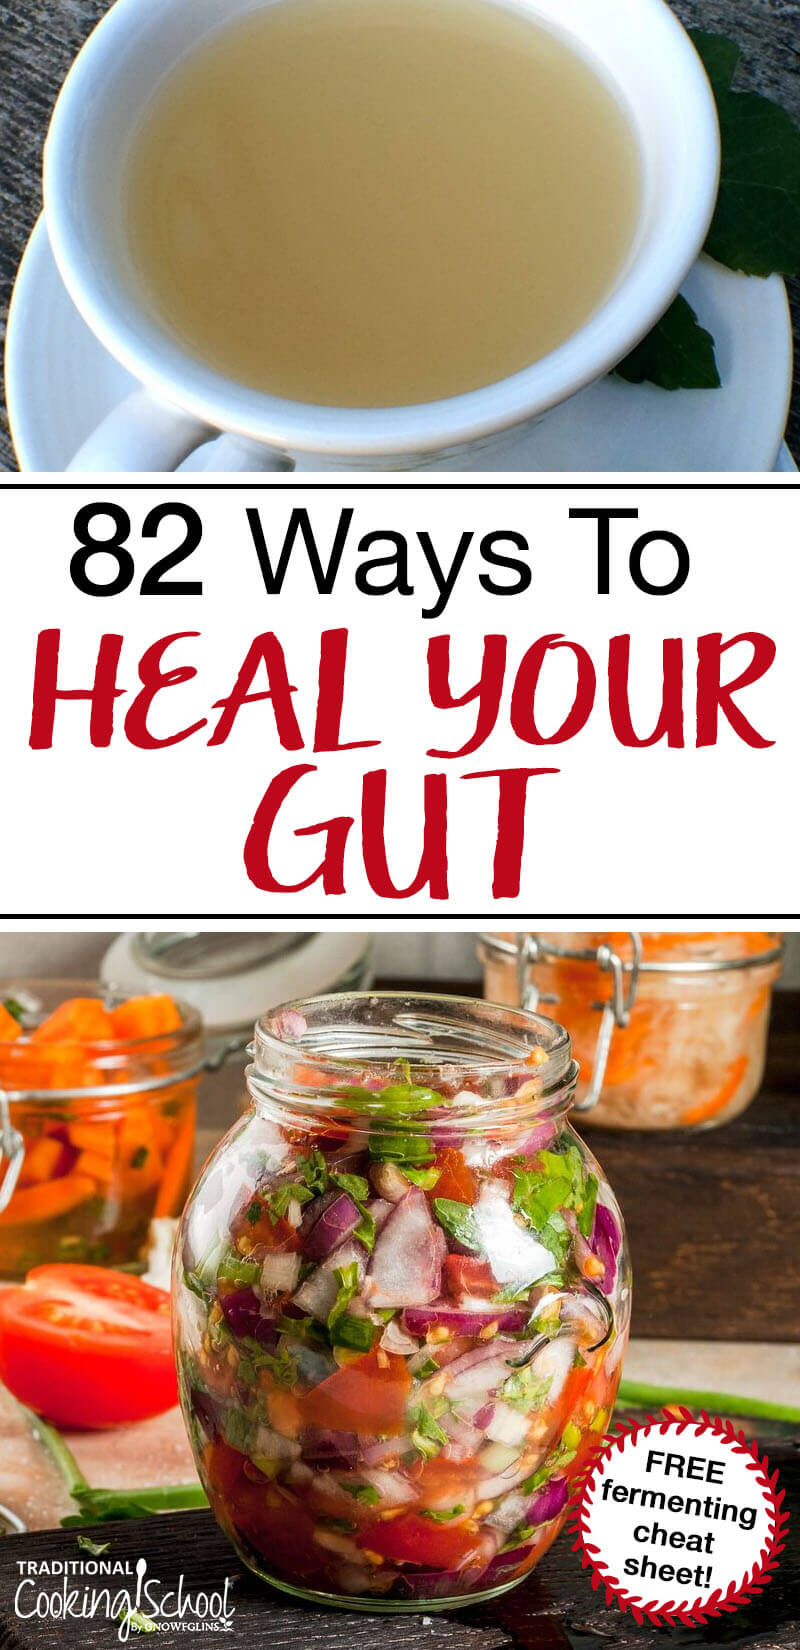 Pinterest Pin with two images. Top image is a cup of broth, bottom image is a jar filled with fermenting veggies. Text overlay says, "82 Ways to Heal Your Gut - FREE fermenting cheat sheet!"